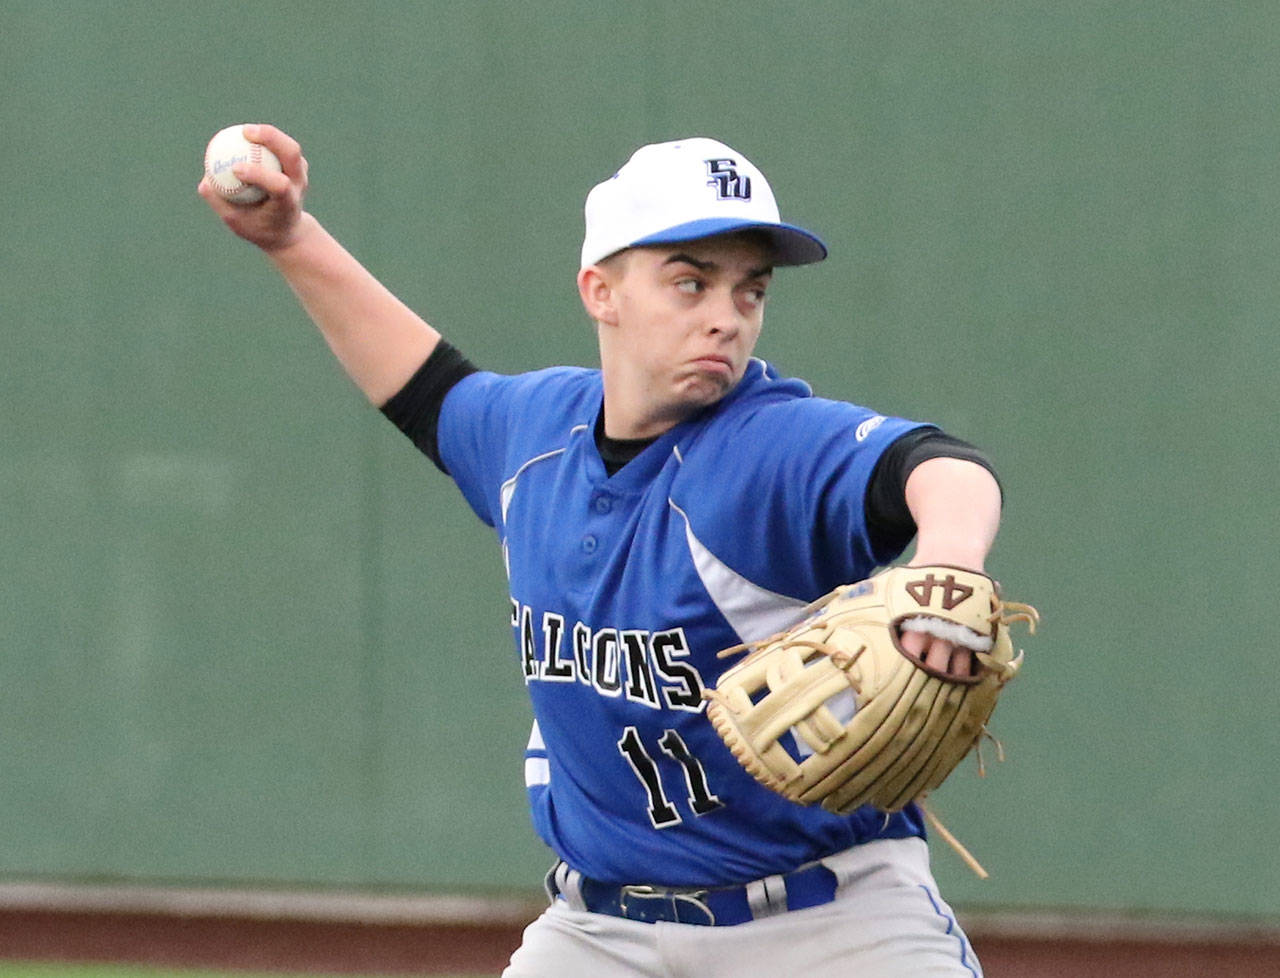 Ethan Petty, shown here in a game earlier this season, threw a no-hitter against King’s Friday. (Photo by John Fisken)